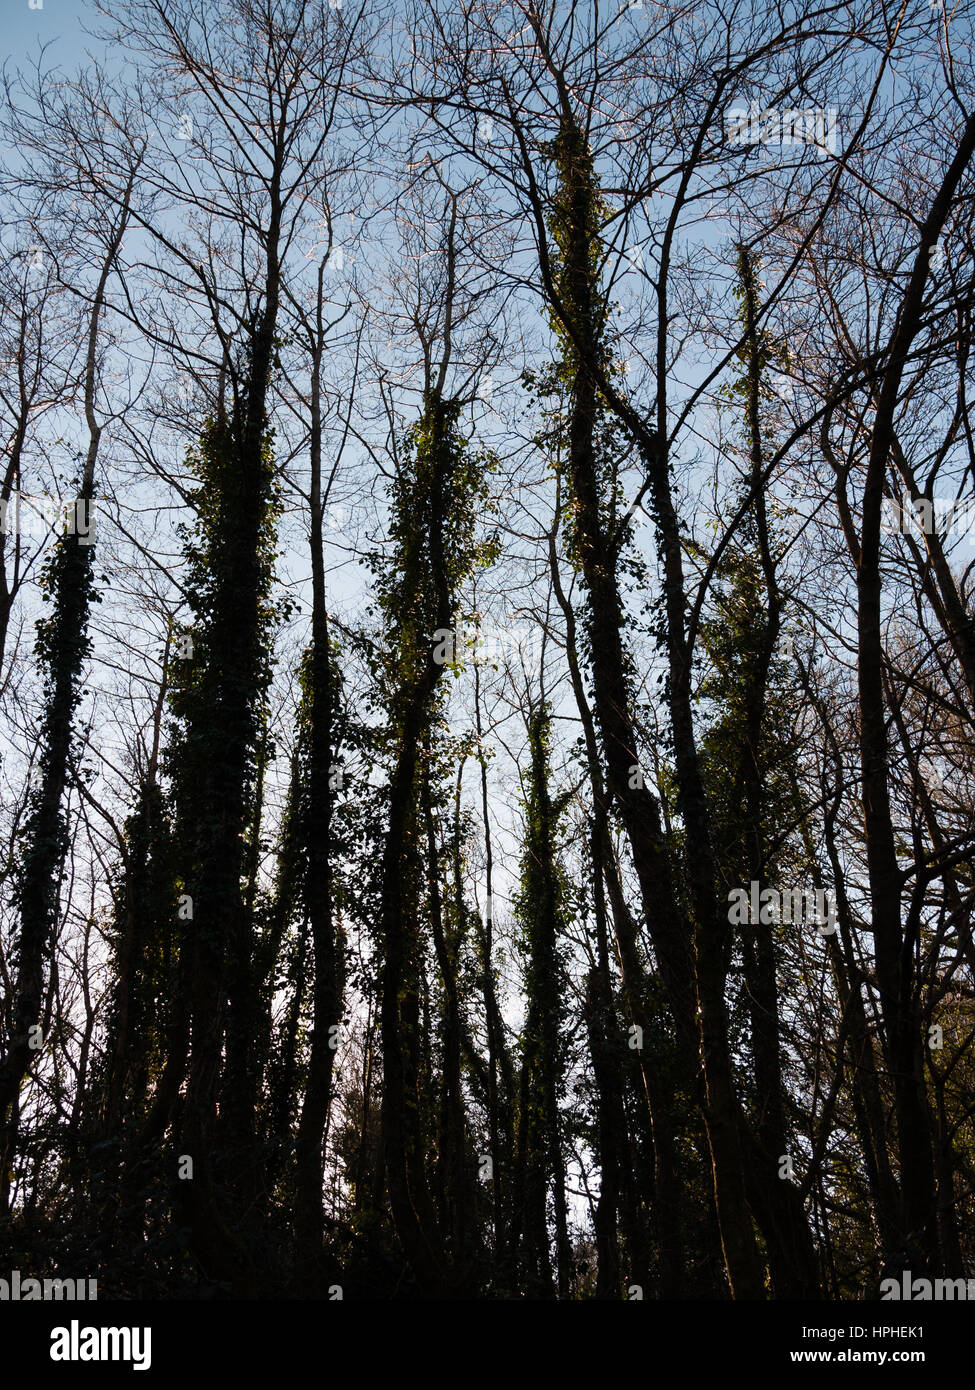 View of a group of trees with few leaves. The lighting condition makes them appear sihouetted Stock Photo